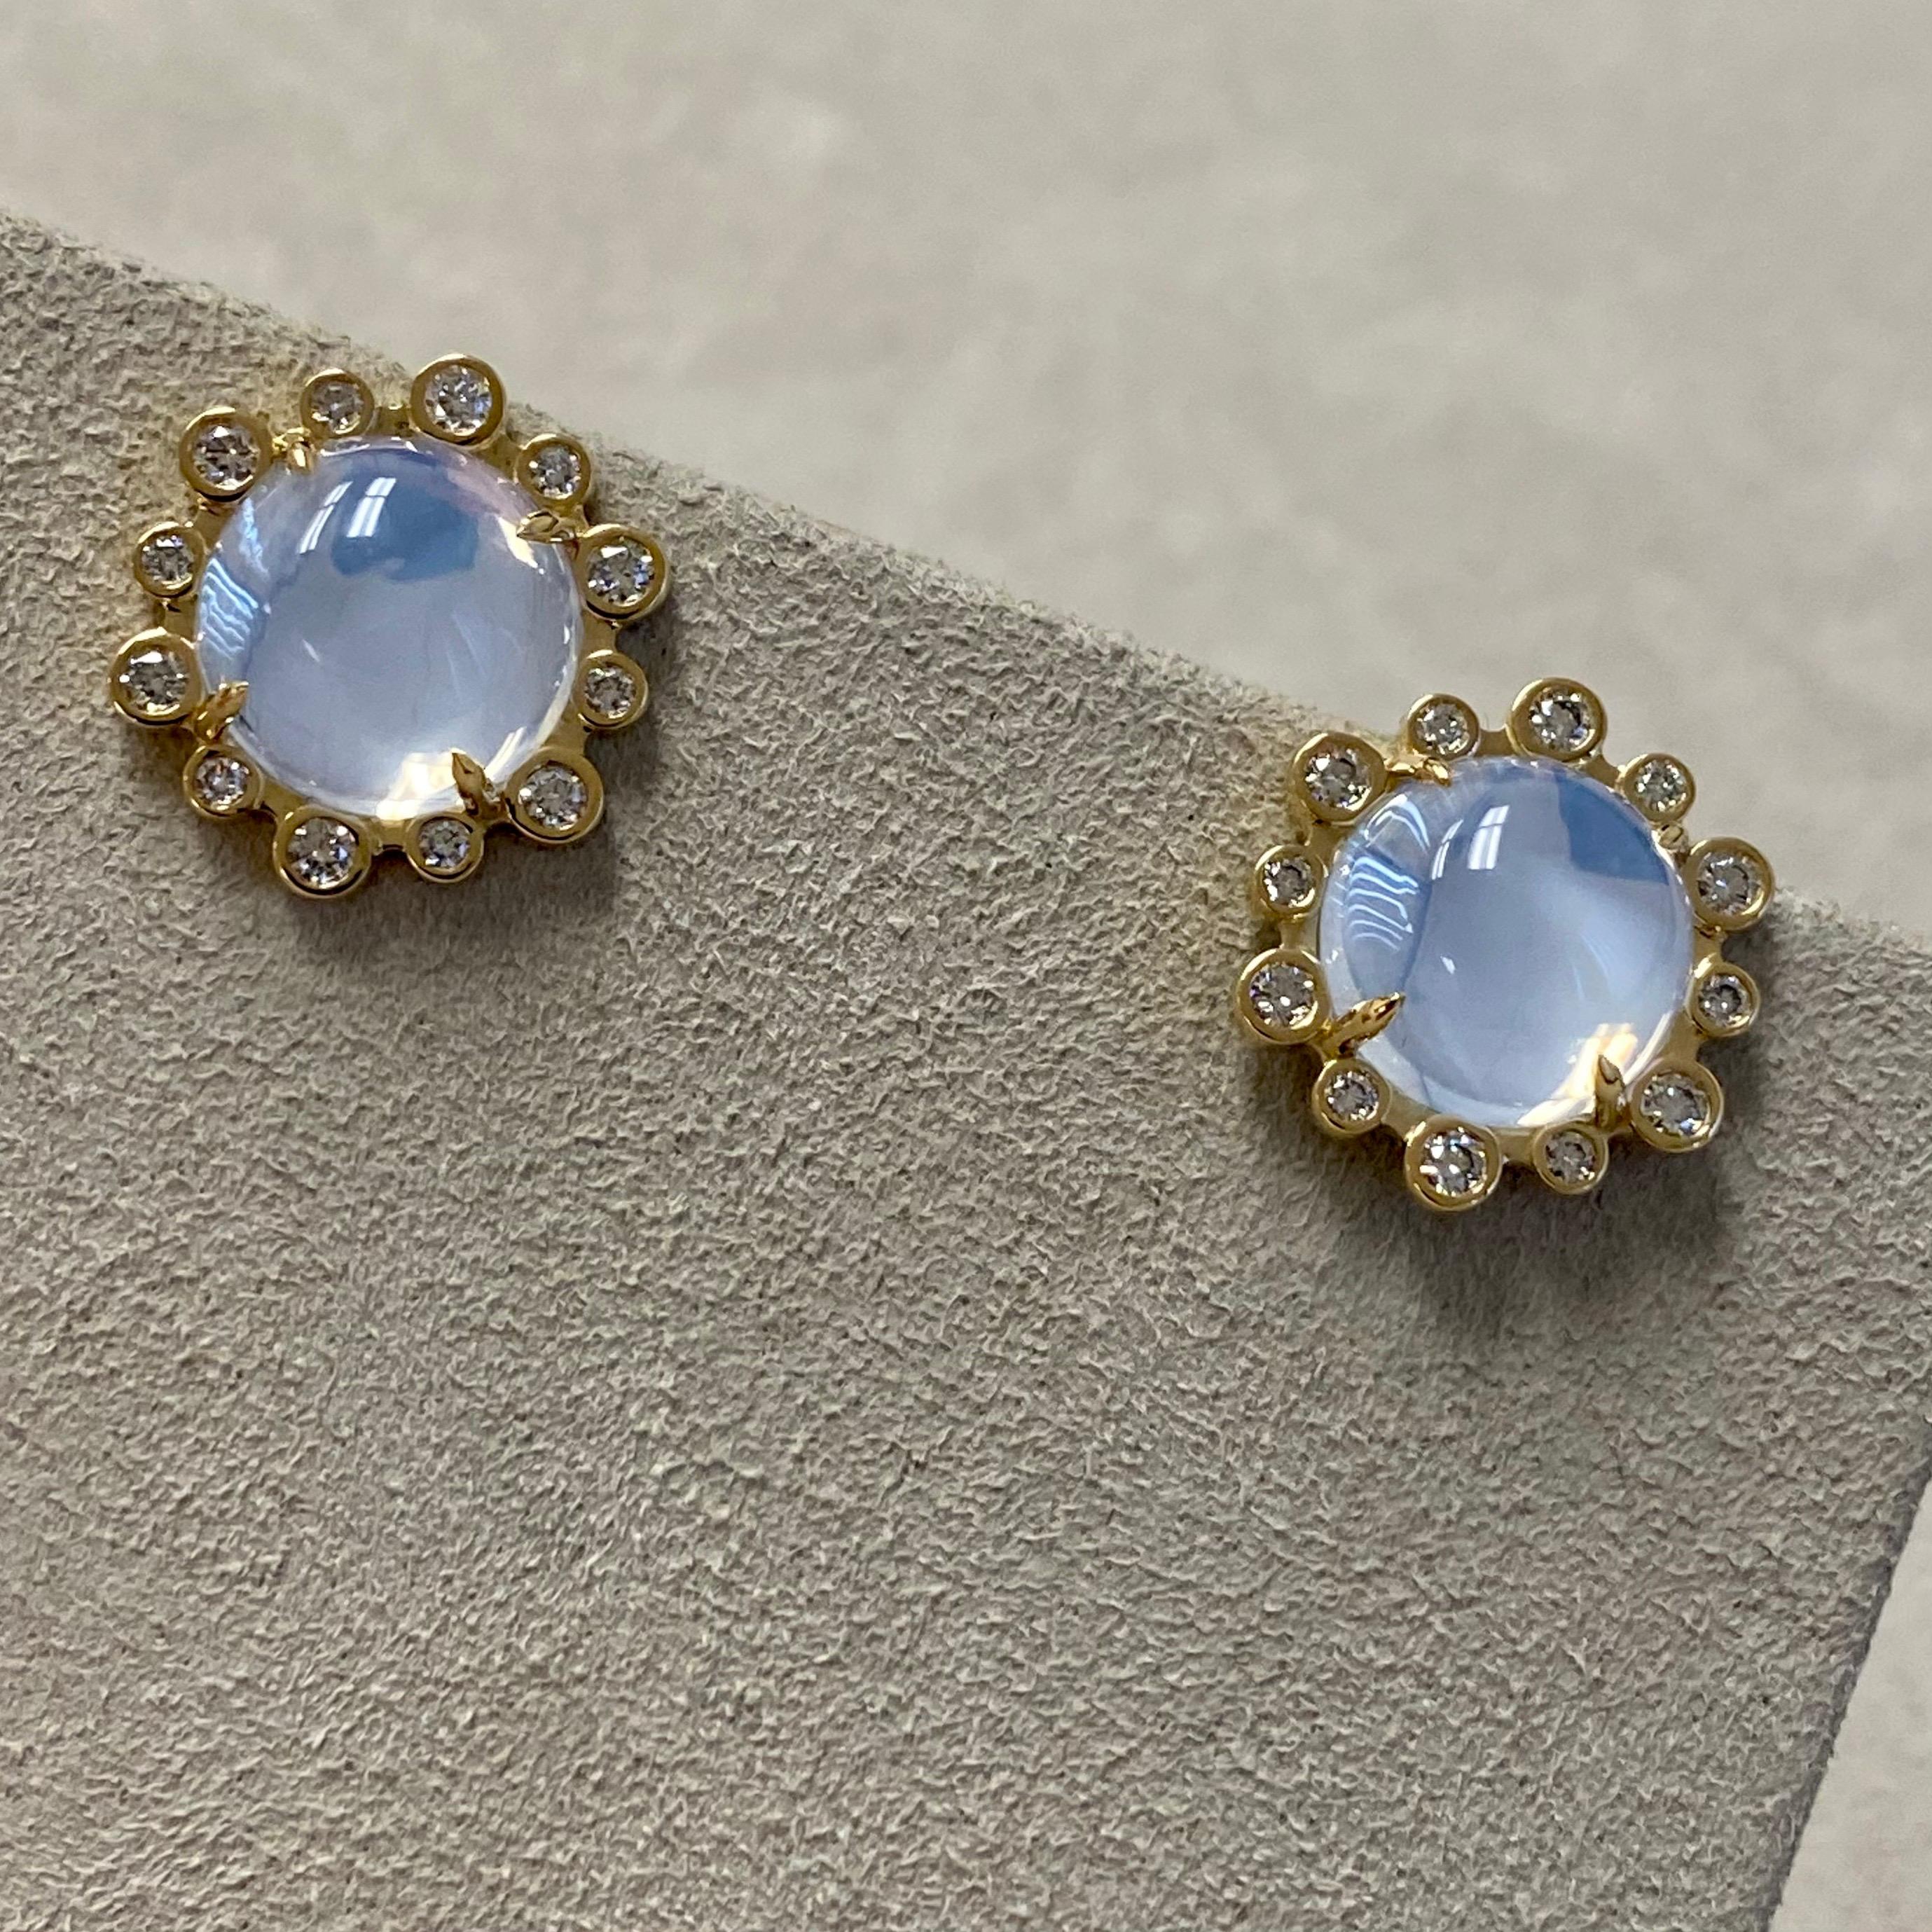 Created in 18 karat yellow gold
Moon Quartz 4.5 carats approx.
Diamonds 0.50 carat approx.
Omega clip-backs & posts
Limited Edition

Formulated from 18-karat yellow gold, these limited edition earrings boast a sweeping Moon Quartz of approximately